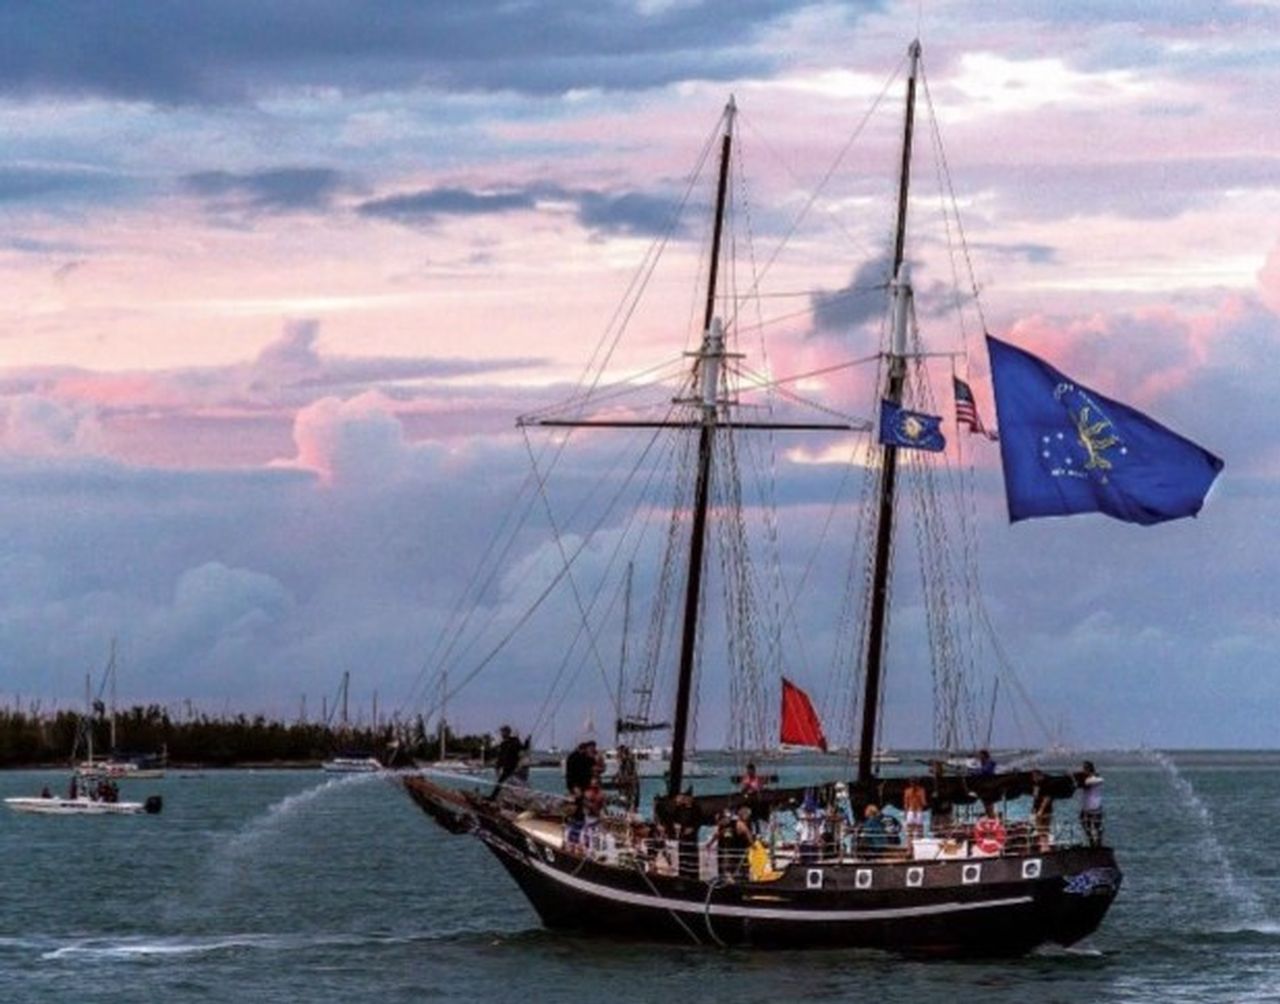 The Great Sea Battle of the Conch Republic re-enactment takes place Friday, April 26 at 7 p.m. on Key West Harbor. 